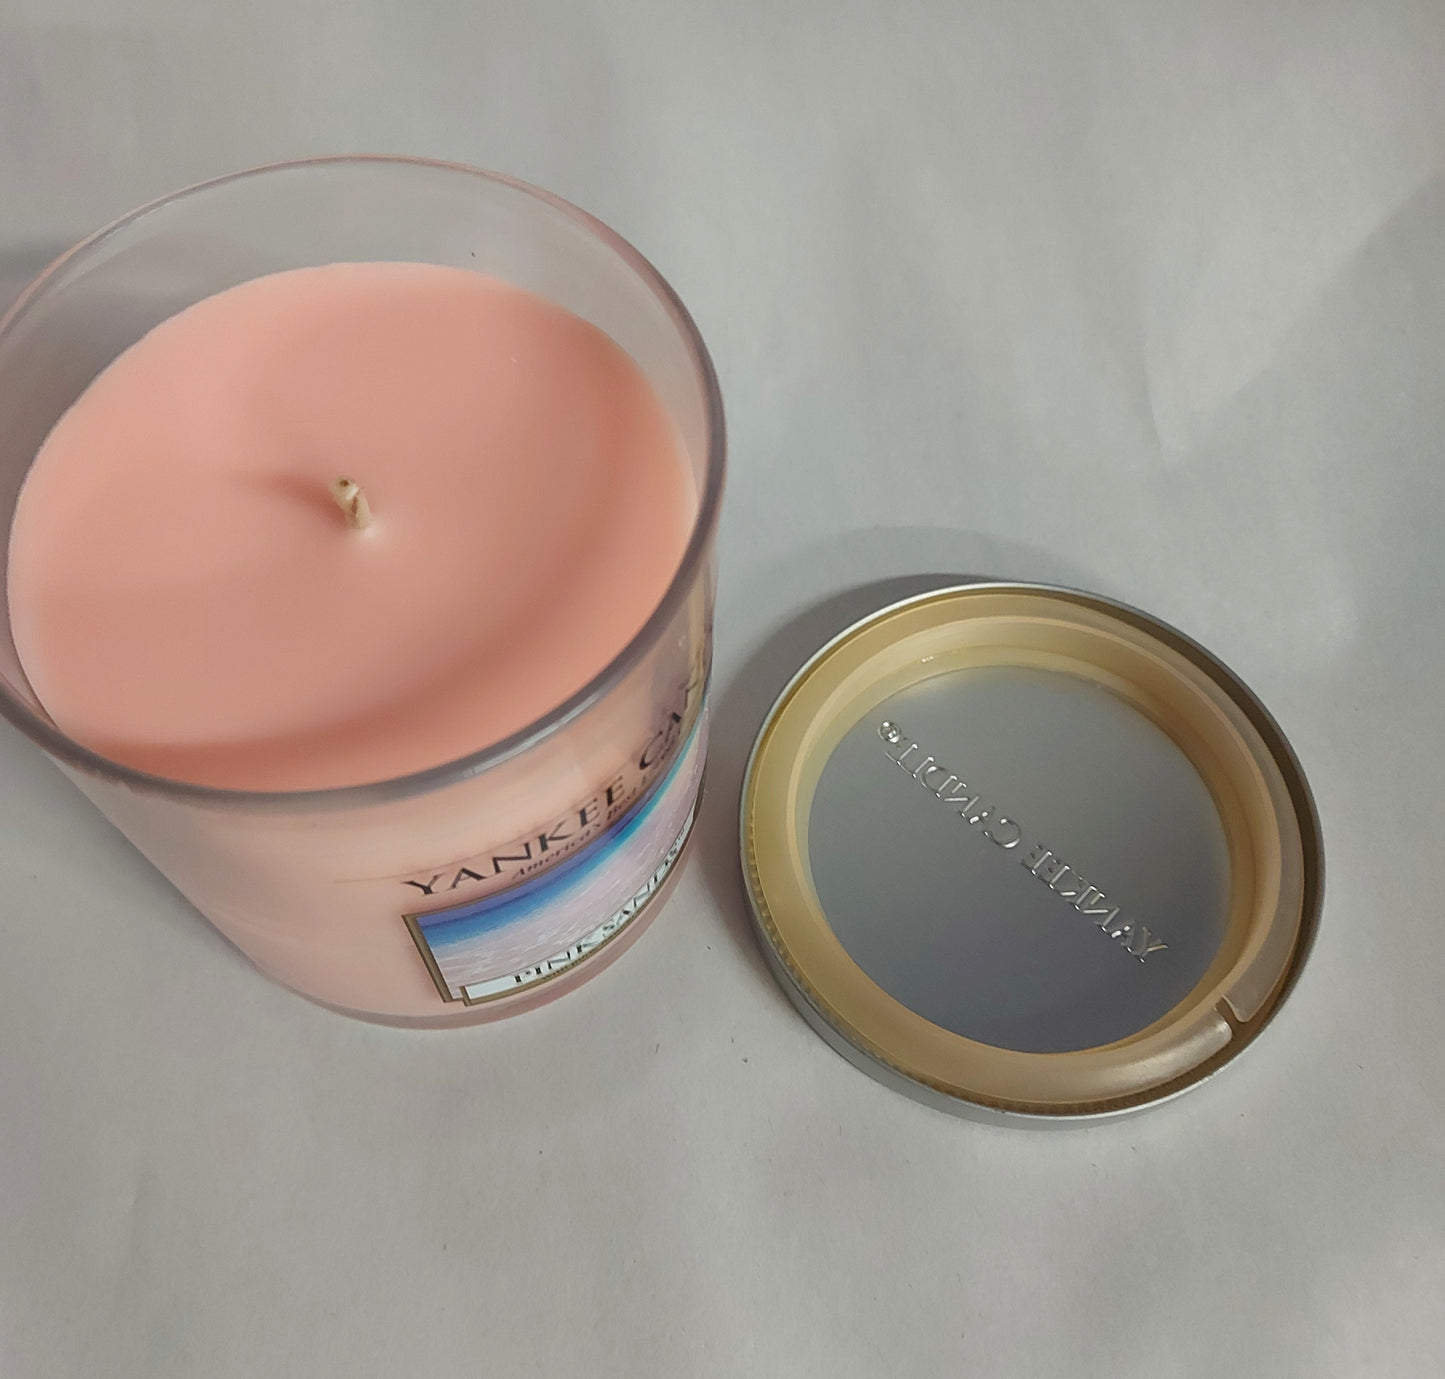 Deal- Yankee candle Pink Sands small 7 oz single wick